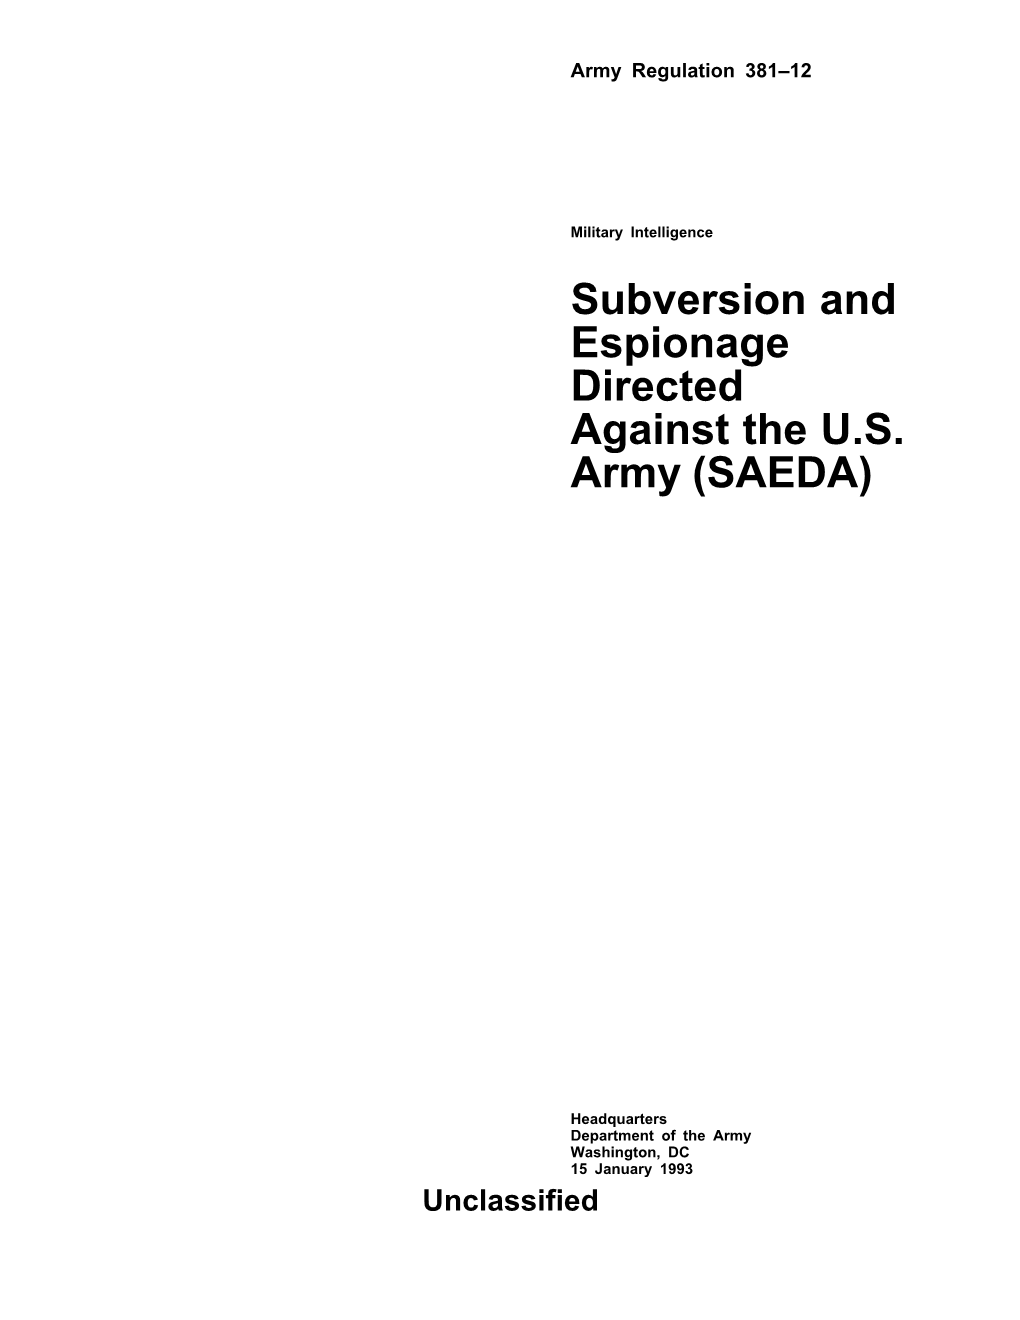 Subversion and Espionage Directed Against the U.S. Army (SAEDA)